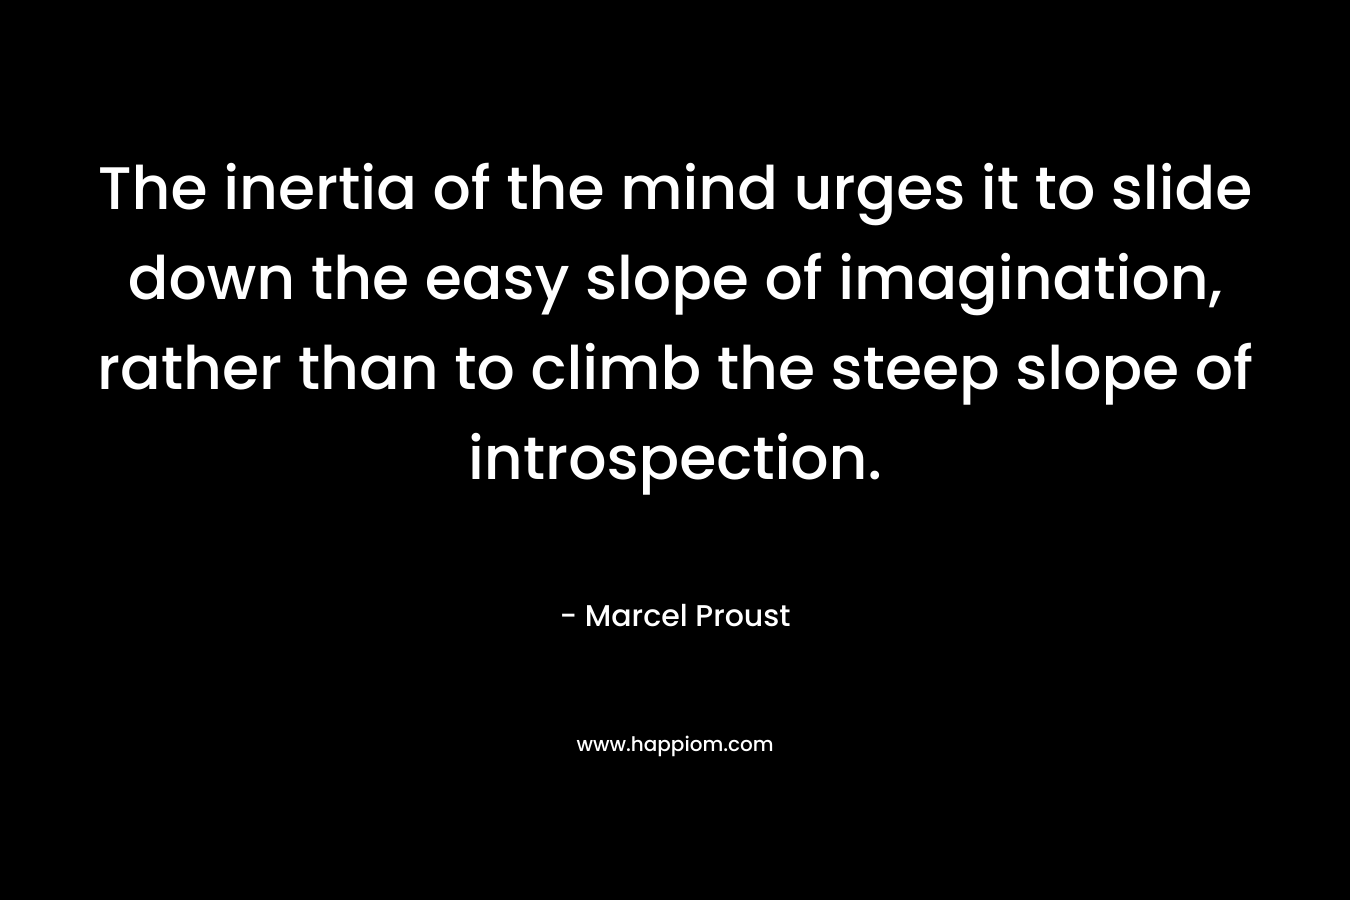 The inertia of the mind urges it to slide down the easy slope of imagination, rather than to climb the steep slope of introspection.